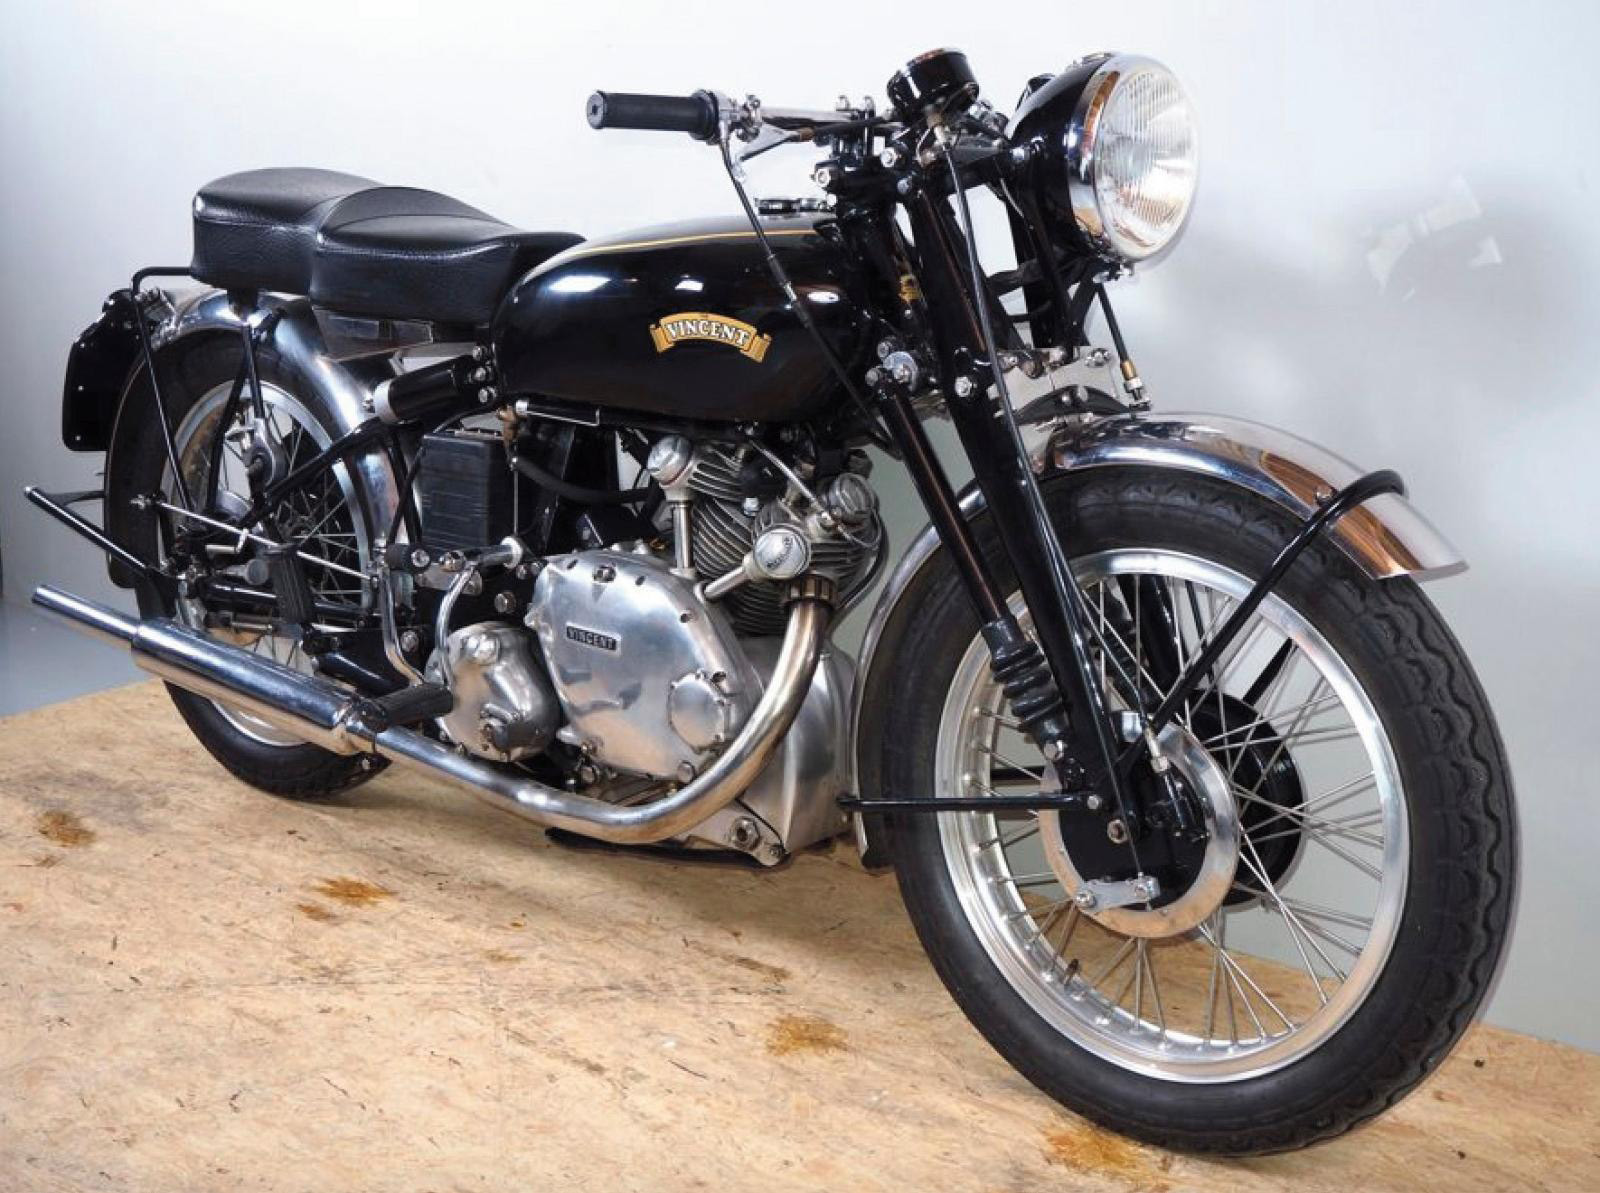 Vincent Comet: An Icon of Motorcycle History